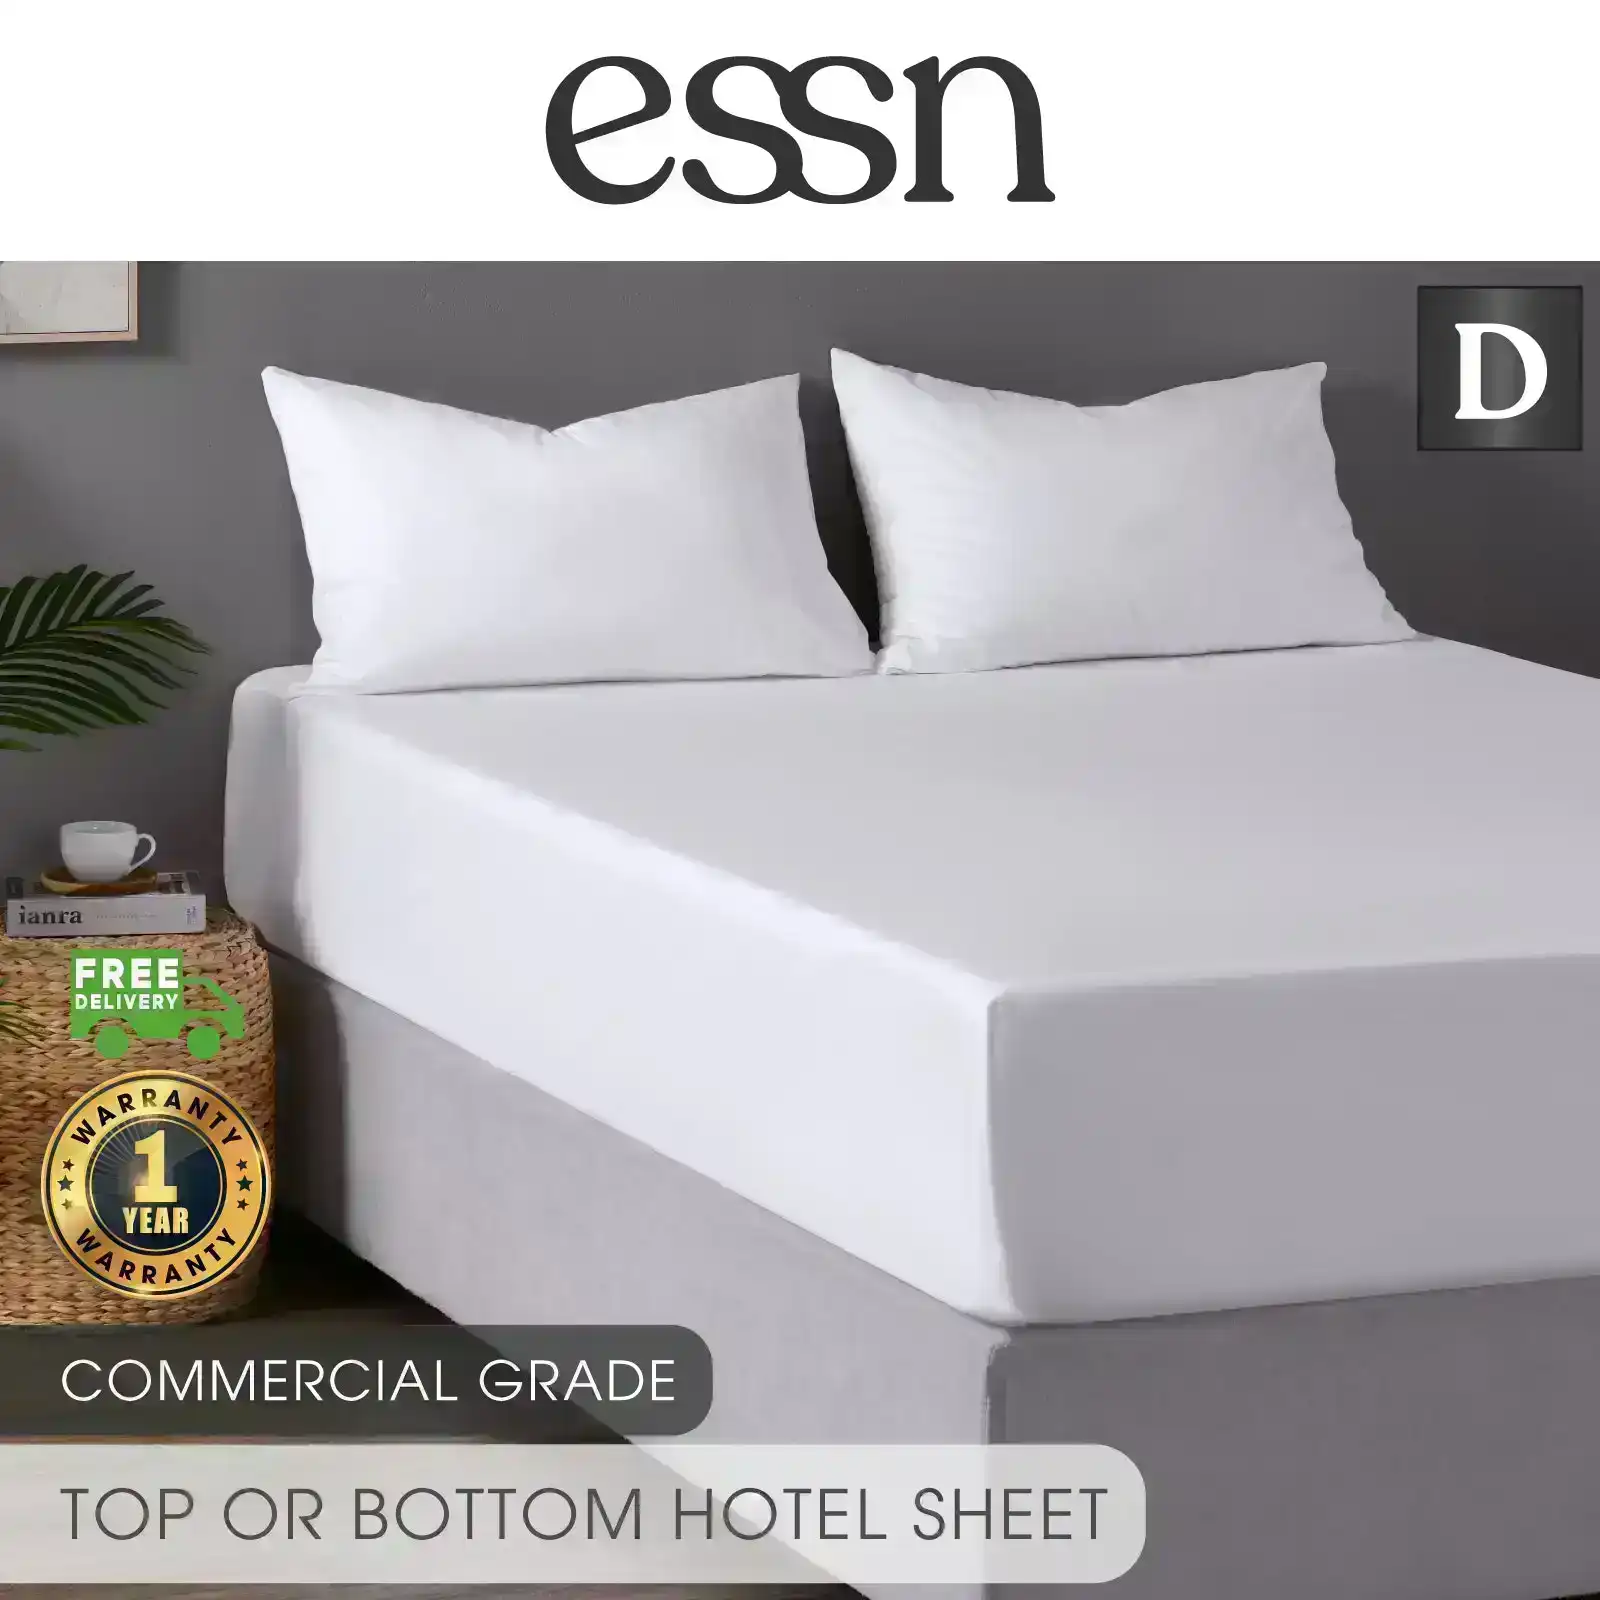 ESSN Commercial Top or Bottom Sheet White Double Bed 240x305cm